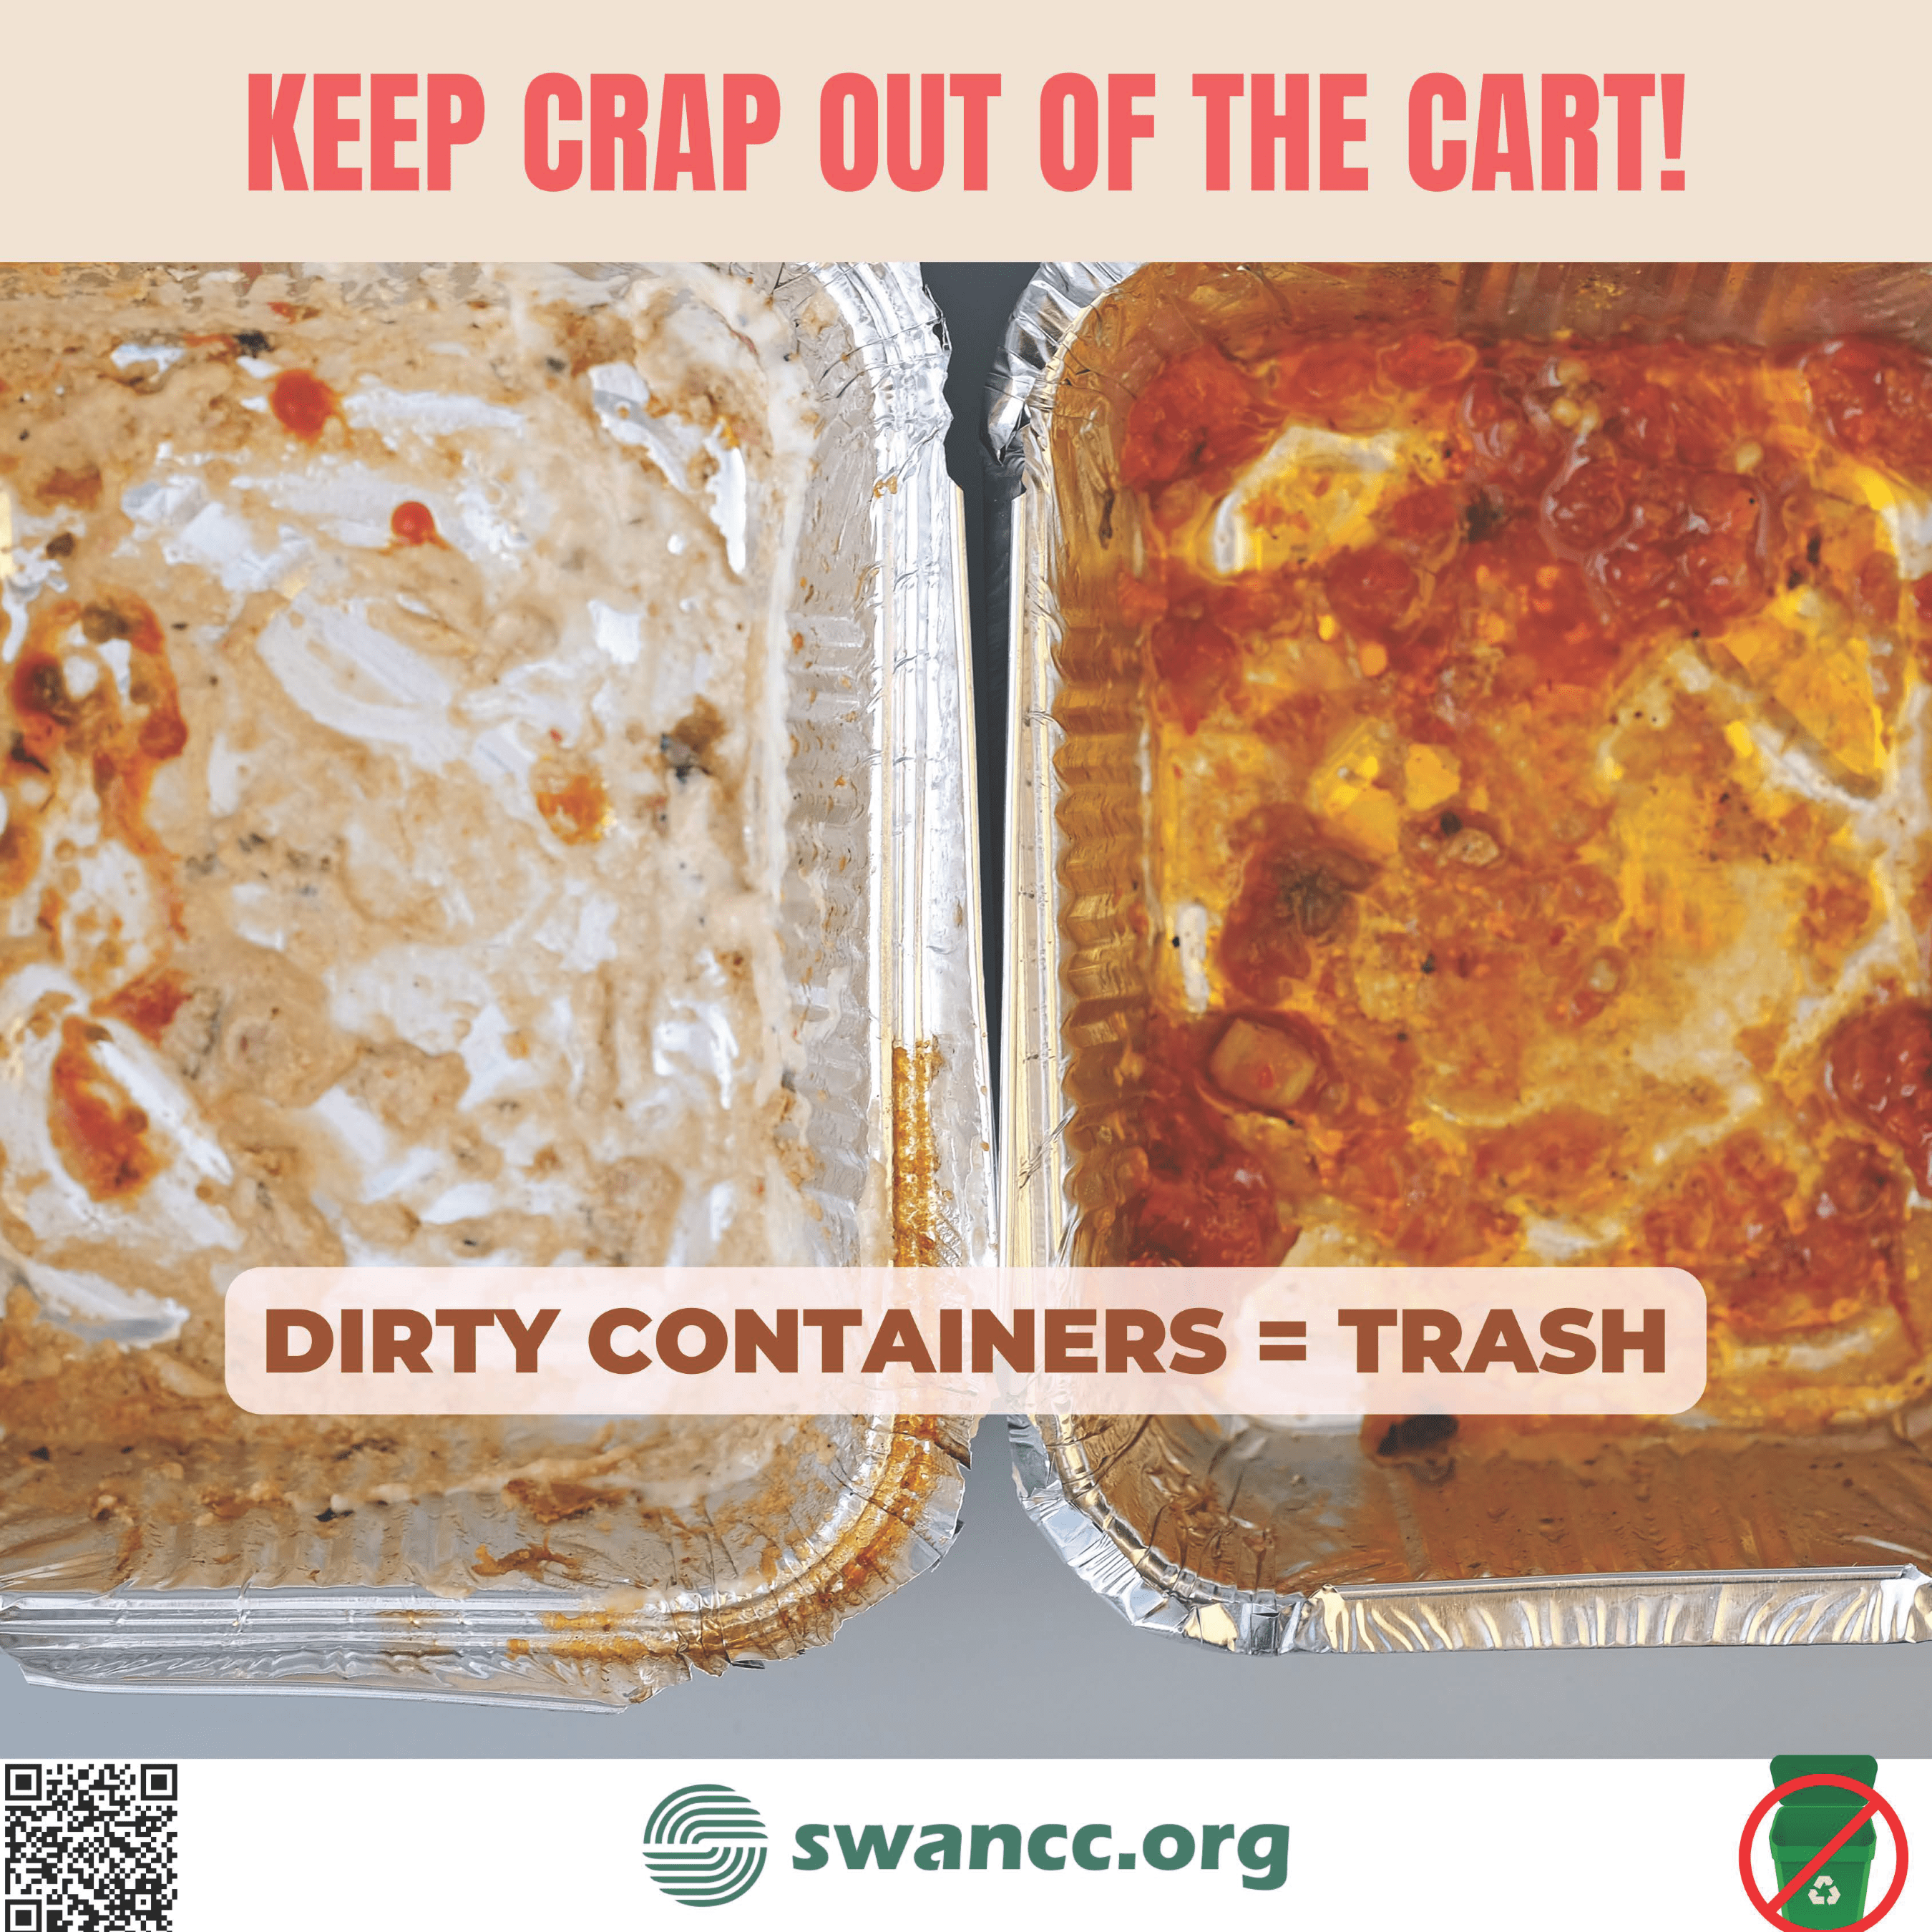 Dirty Containers = Trash